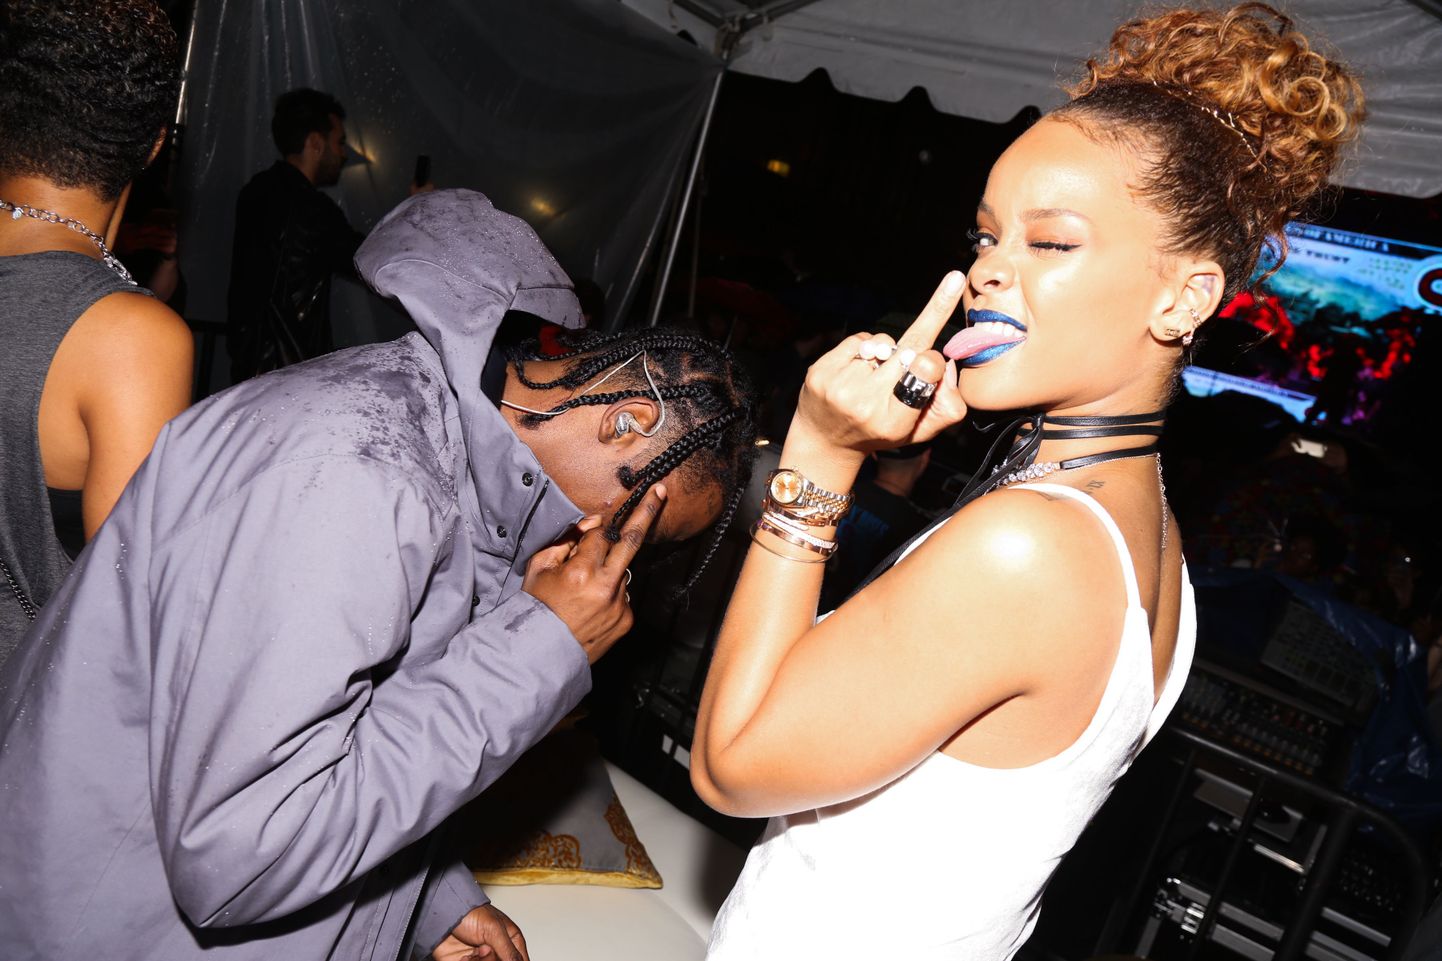 Travis Scott, Rihanna - 9/10/2015 - New York, New York - RIHANNA PARTY AT THE NEW YORK EDITION held at The New York EDITION, NYC. (Photo by Emanuele D'Angelo/BFA) *** Please Use Credit from Credit Field ***